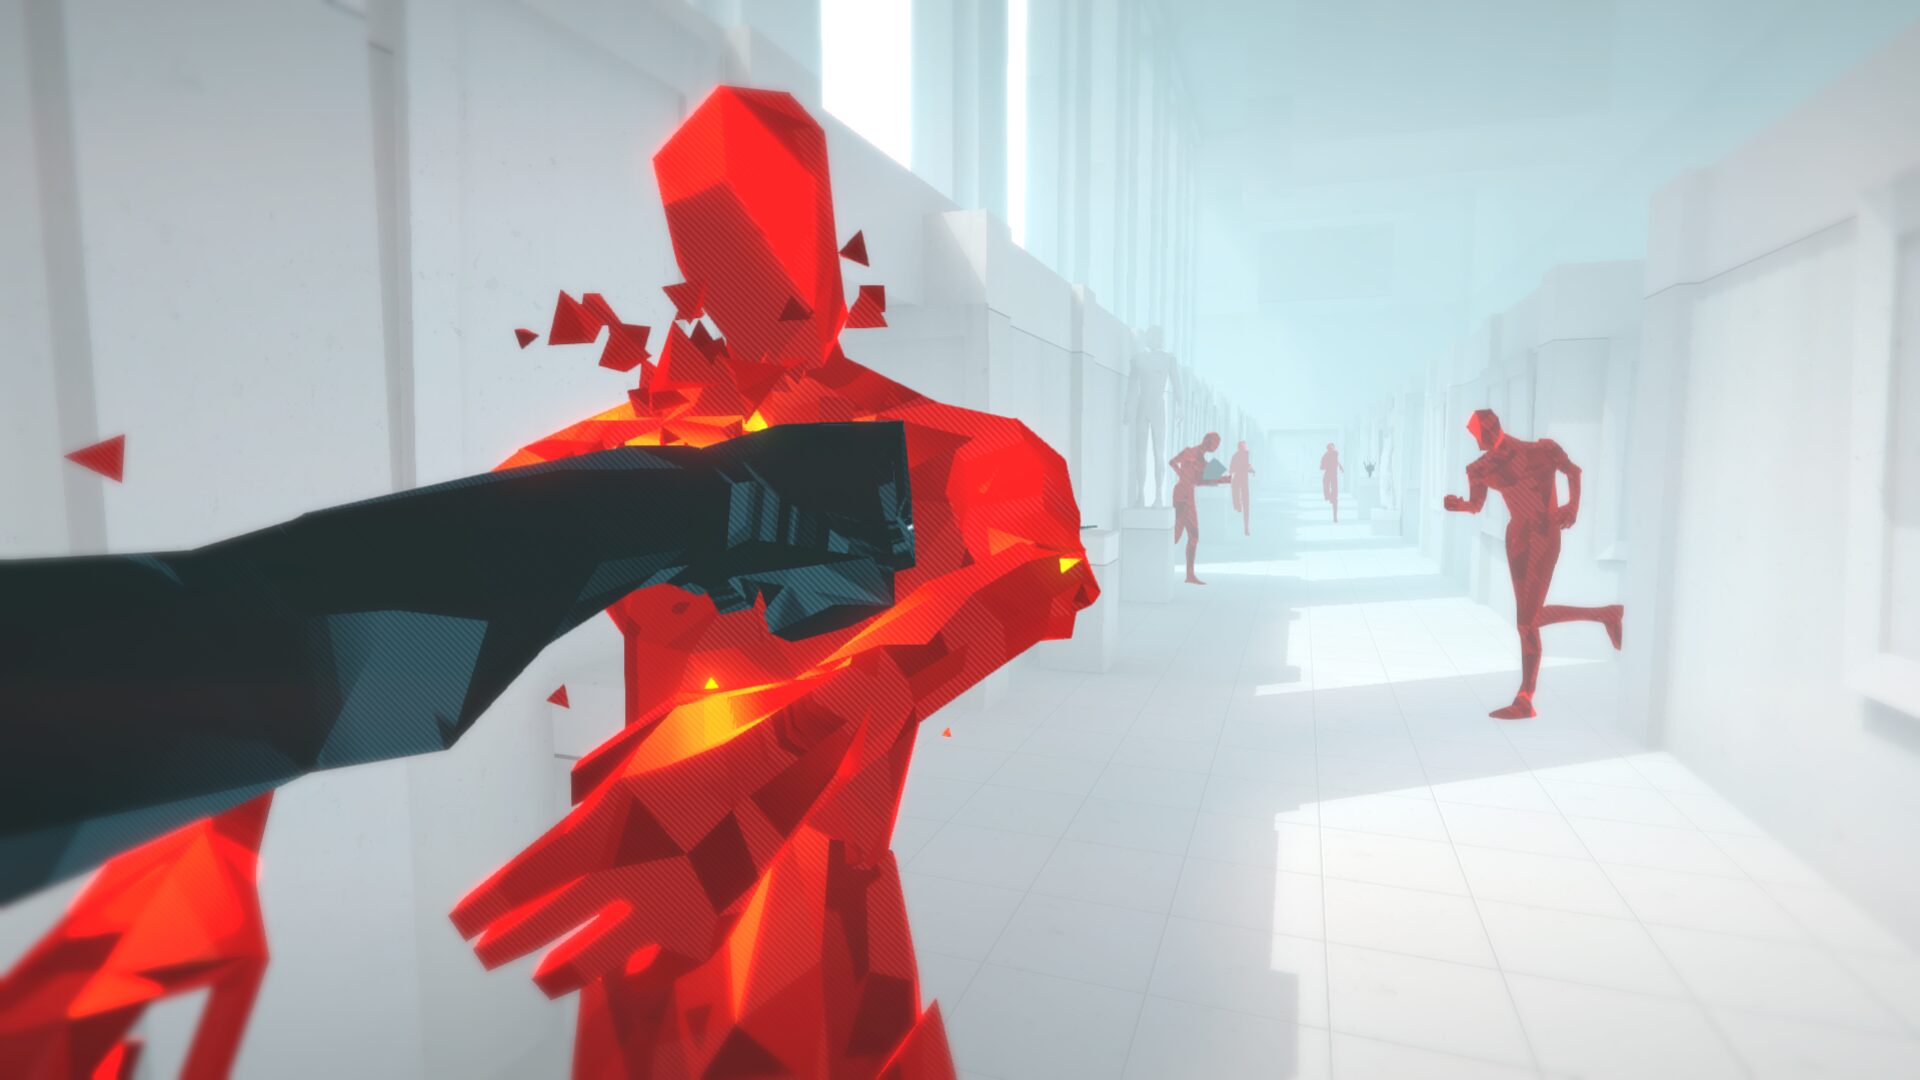 Show Your Talents in the #MAKEITSUPERHOT Art and Game Dev Competition